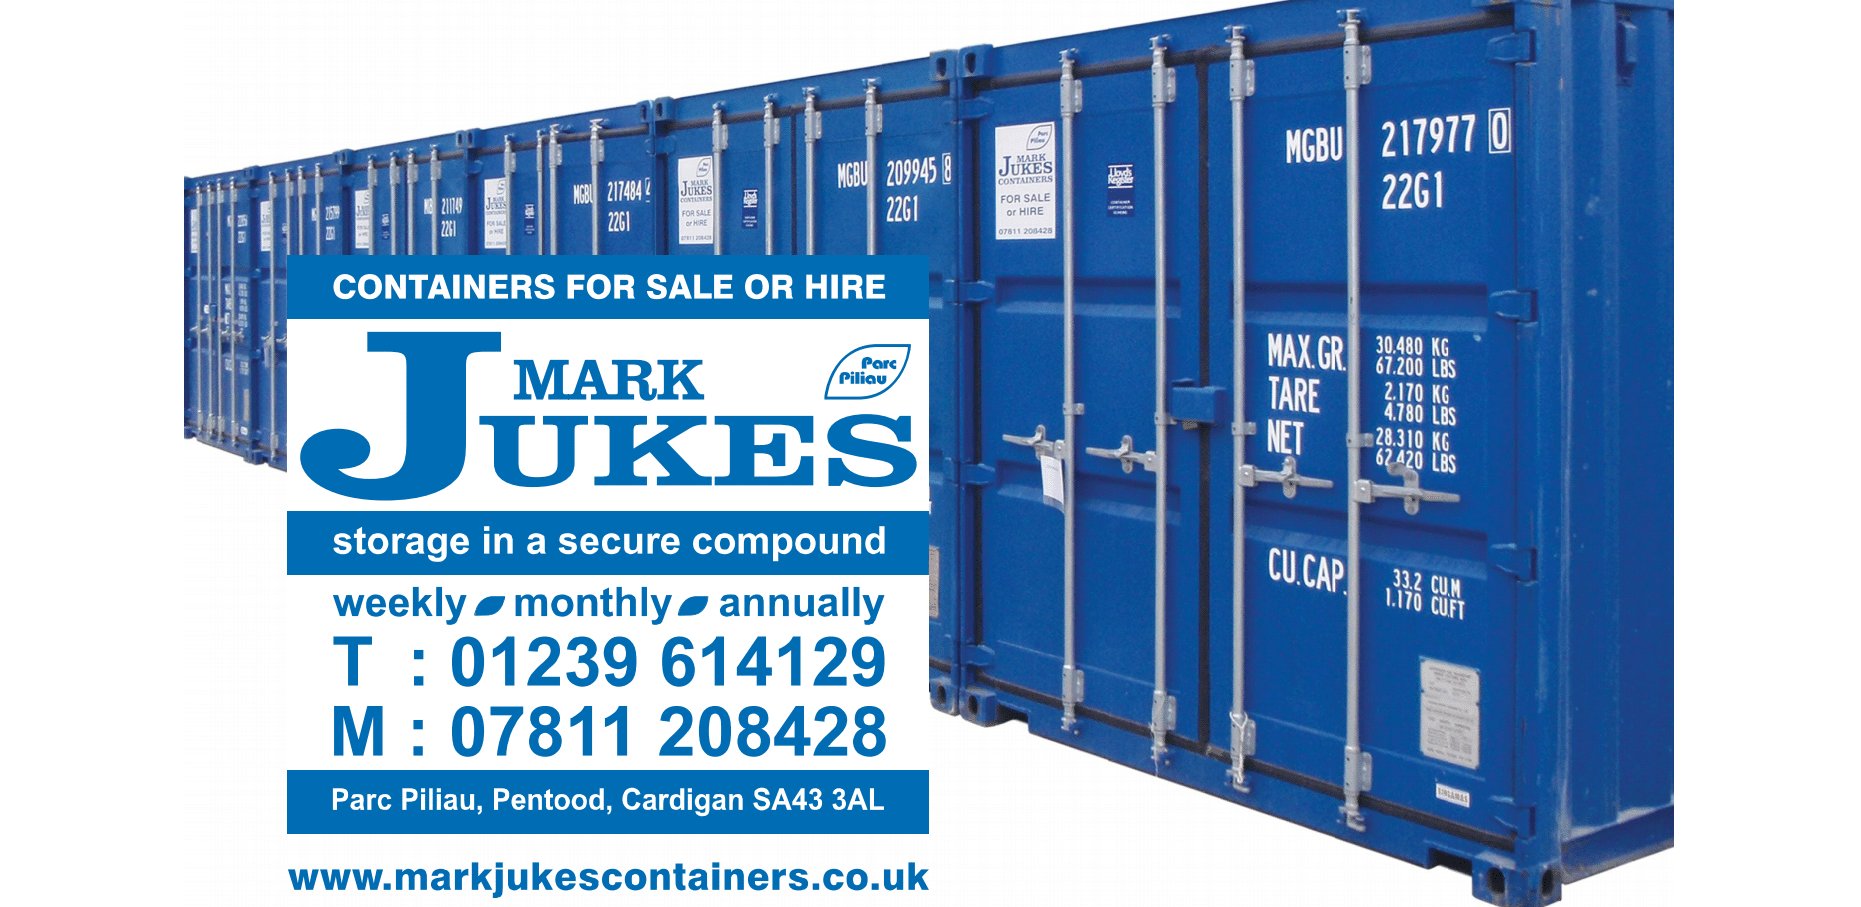 Mark Jukes Containers